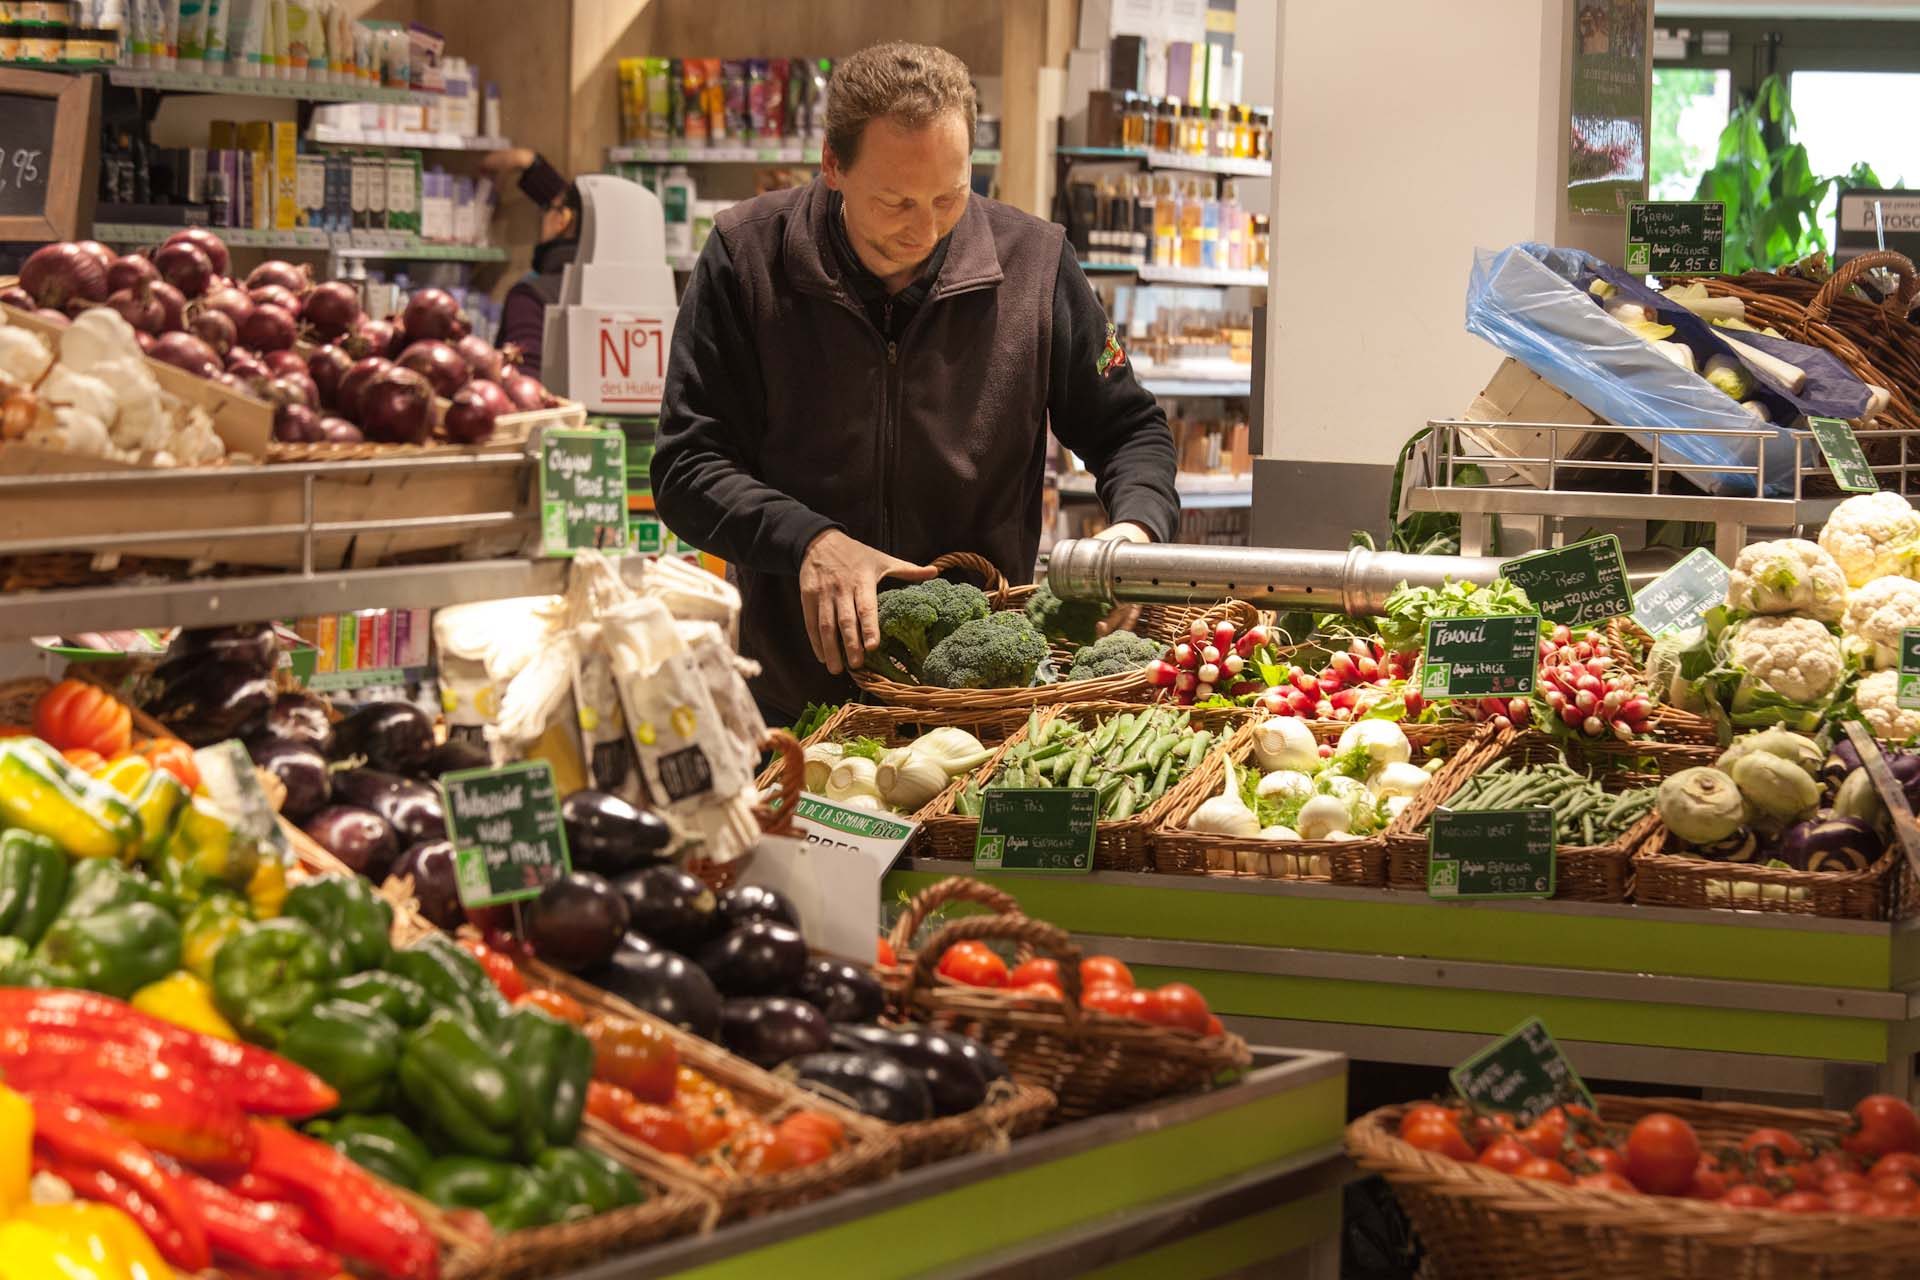 Olivier List, director of the organic supermarket 'Les Halles de Cernay', size about 800 m² with 40 employees.